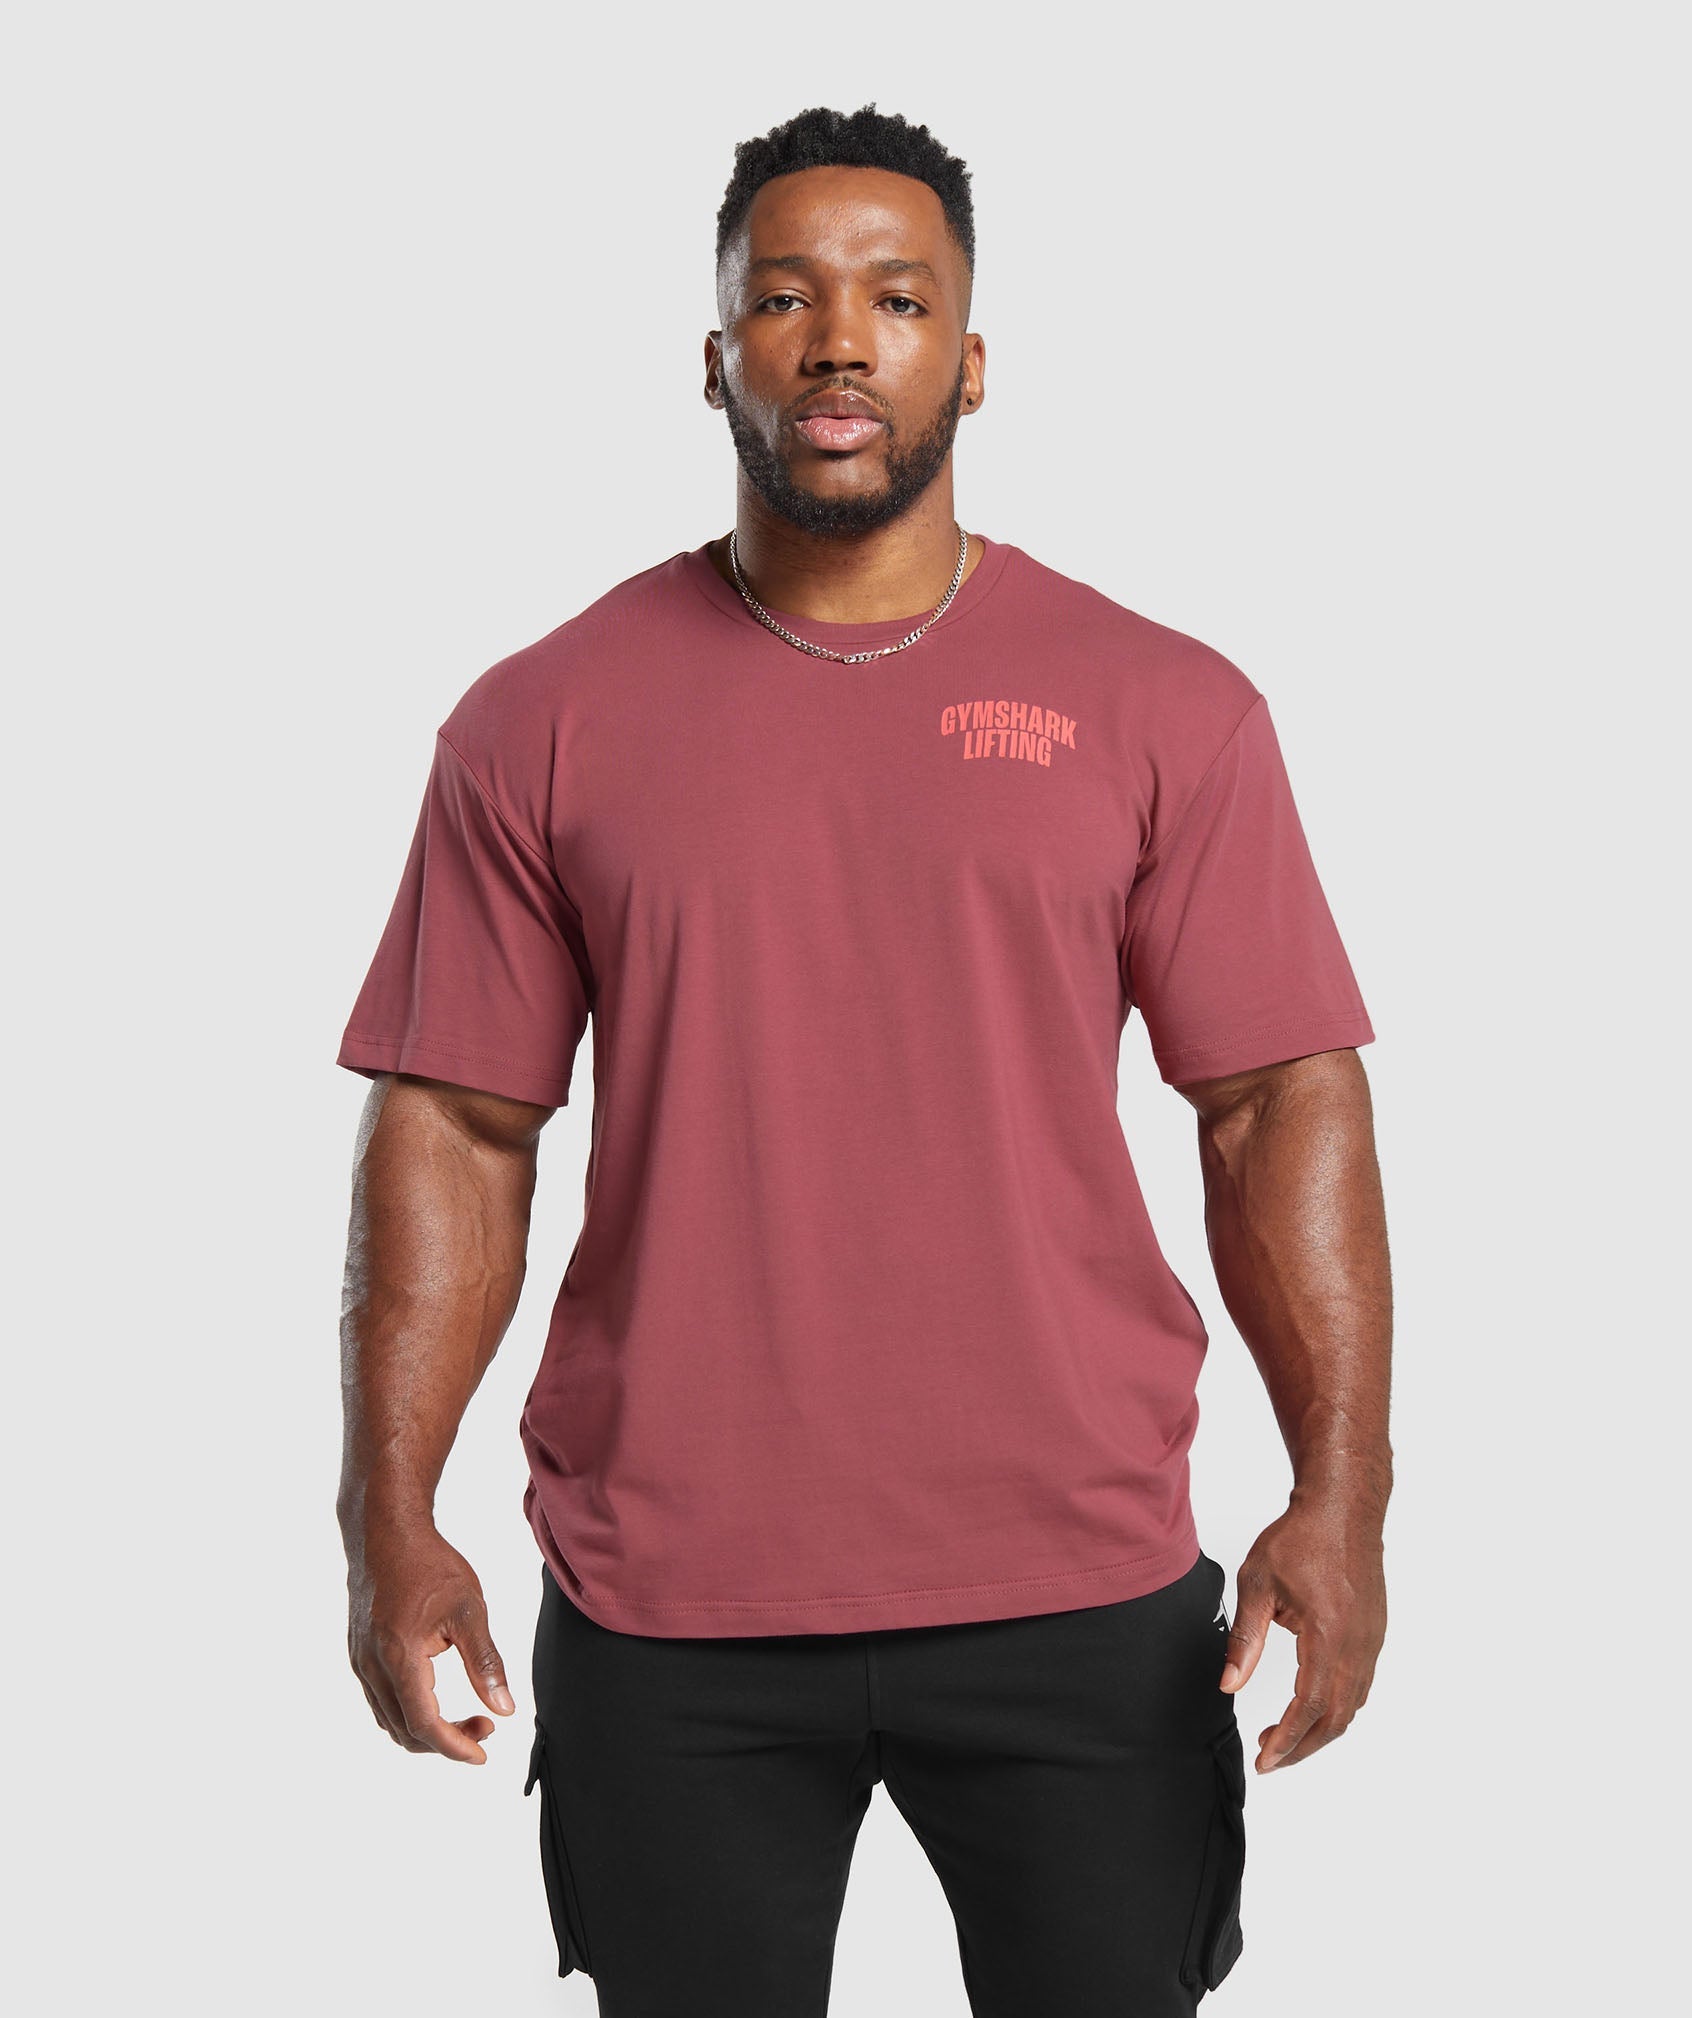 Lifting T-Shirt in Soft Berry - view 2